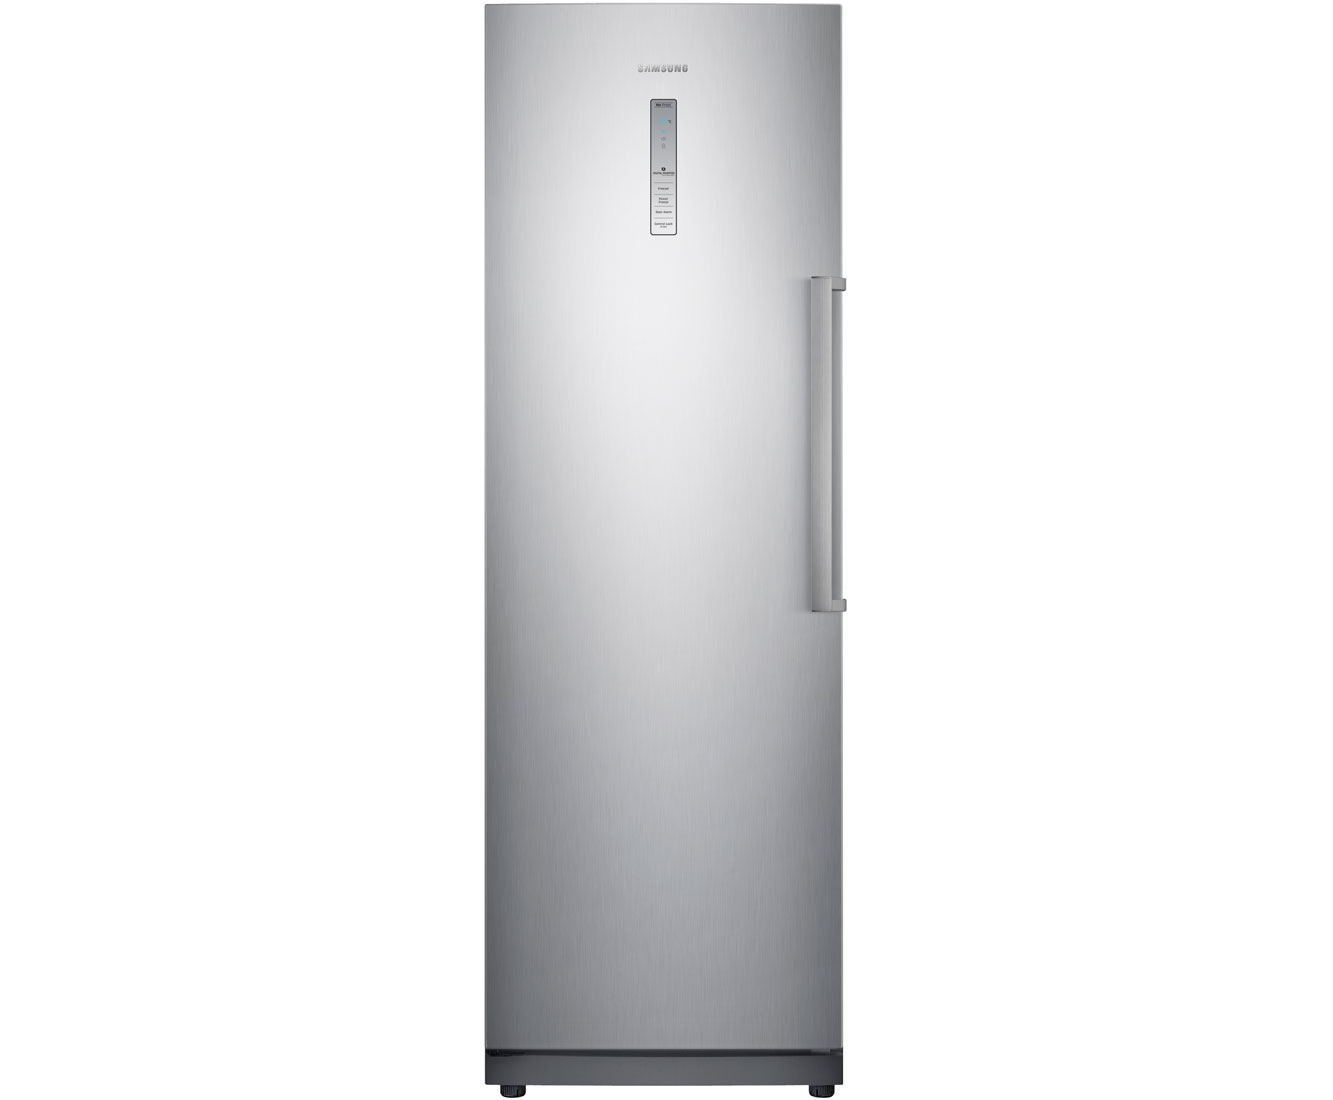 Samsung RZ28H6100SA Free Standing Freezer Frost Free in Graphite